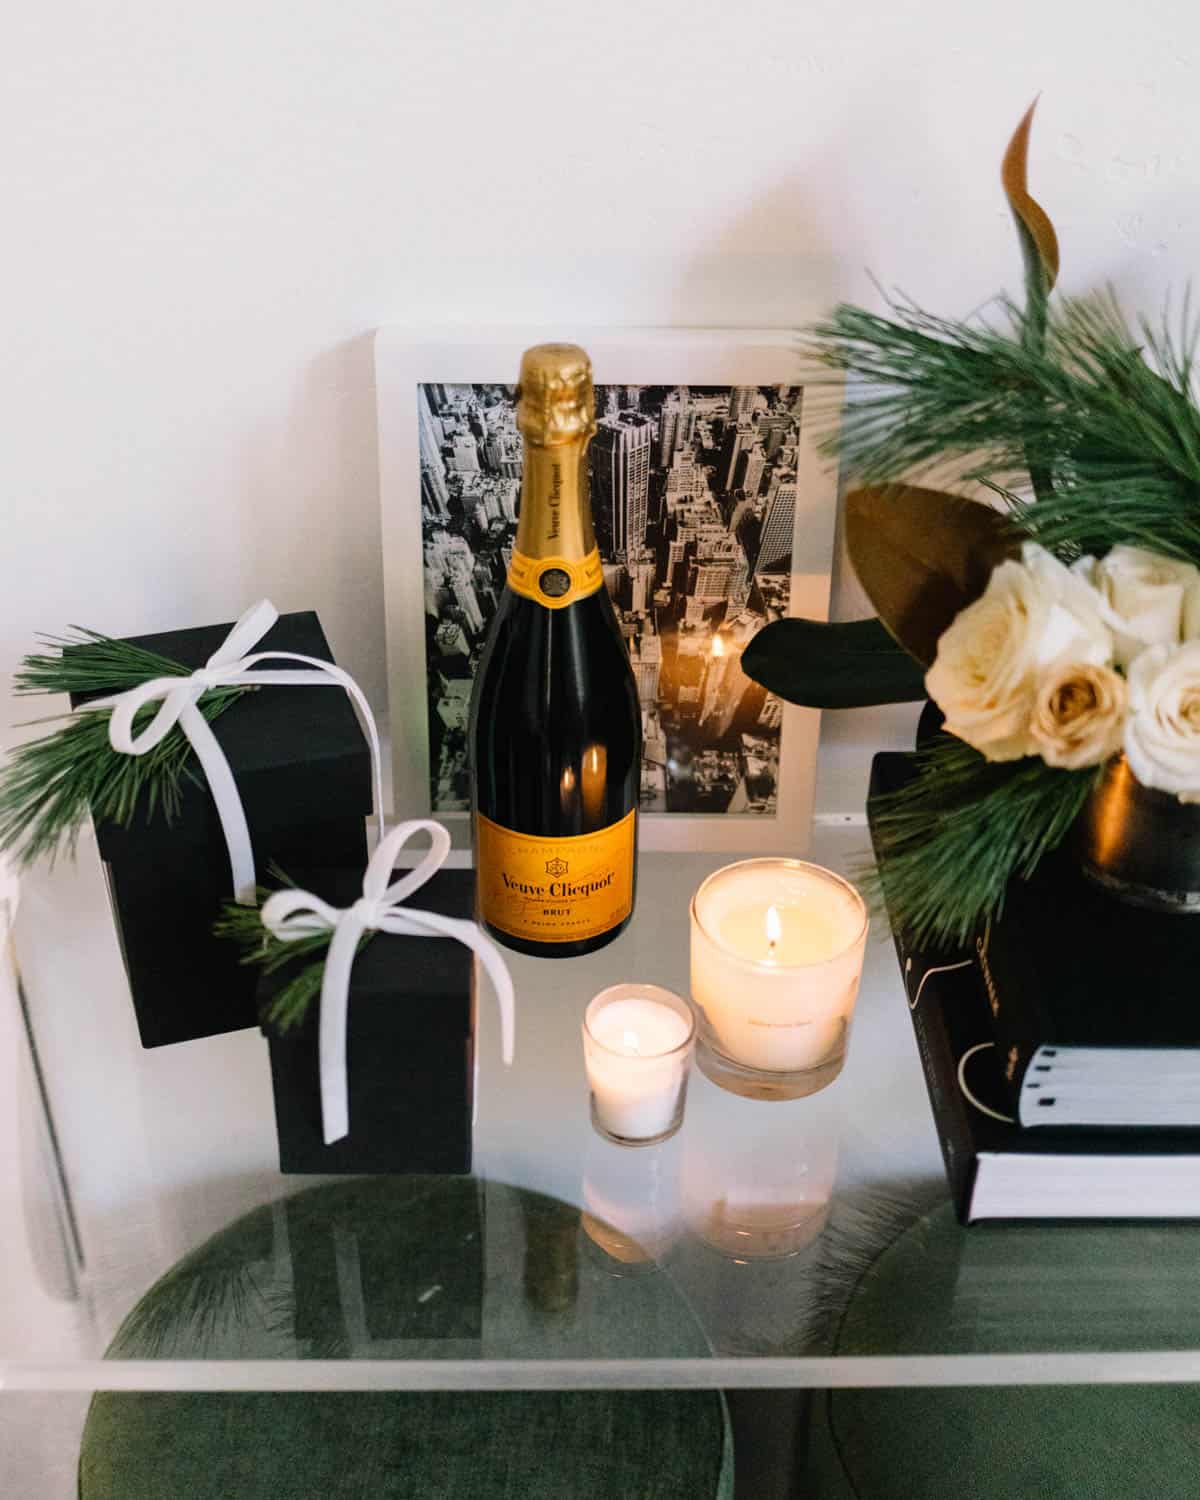 An entry table with holiday gifts, candles and a bottle of champagne.